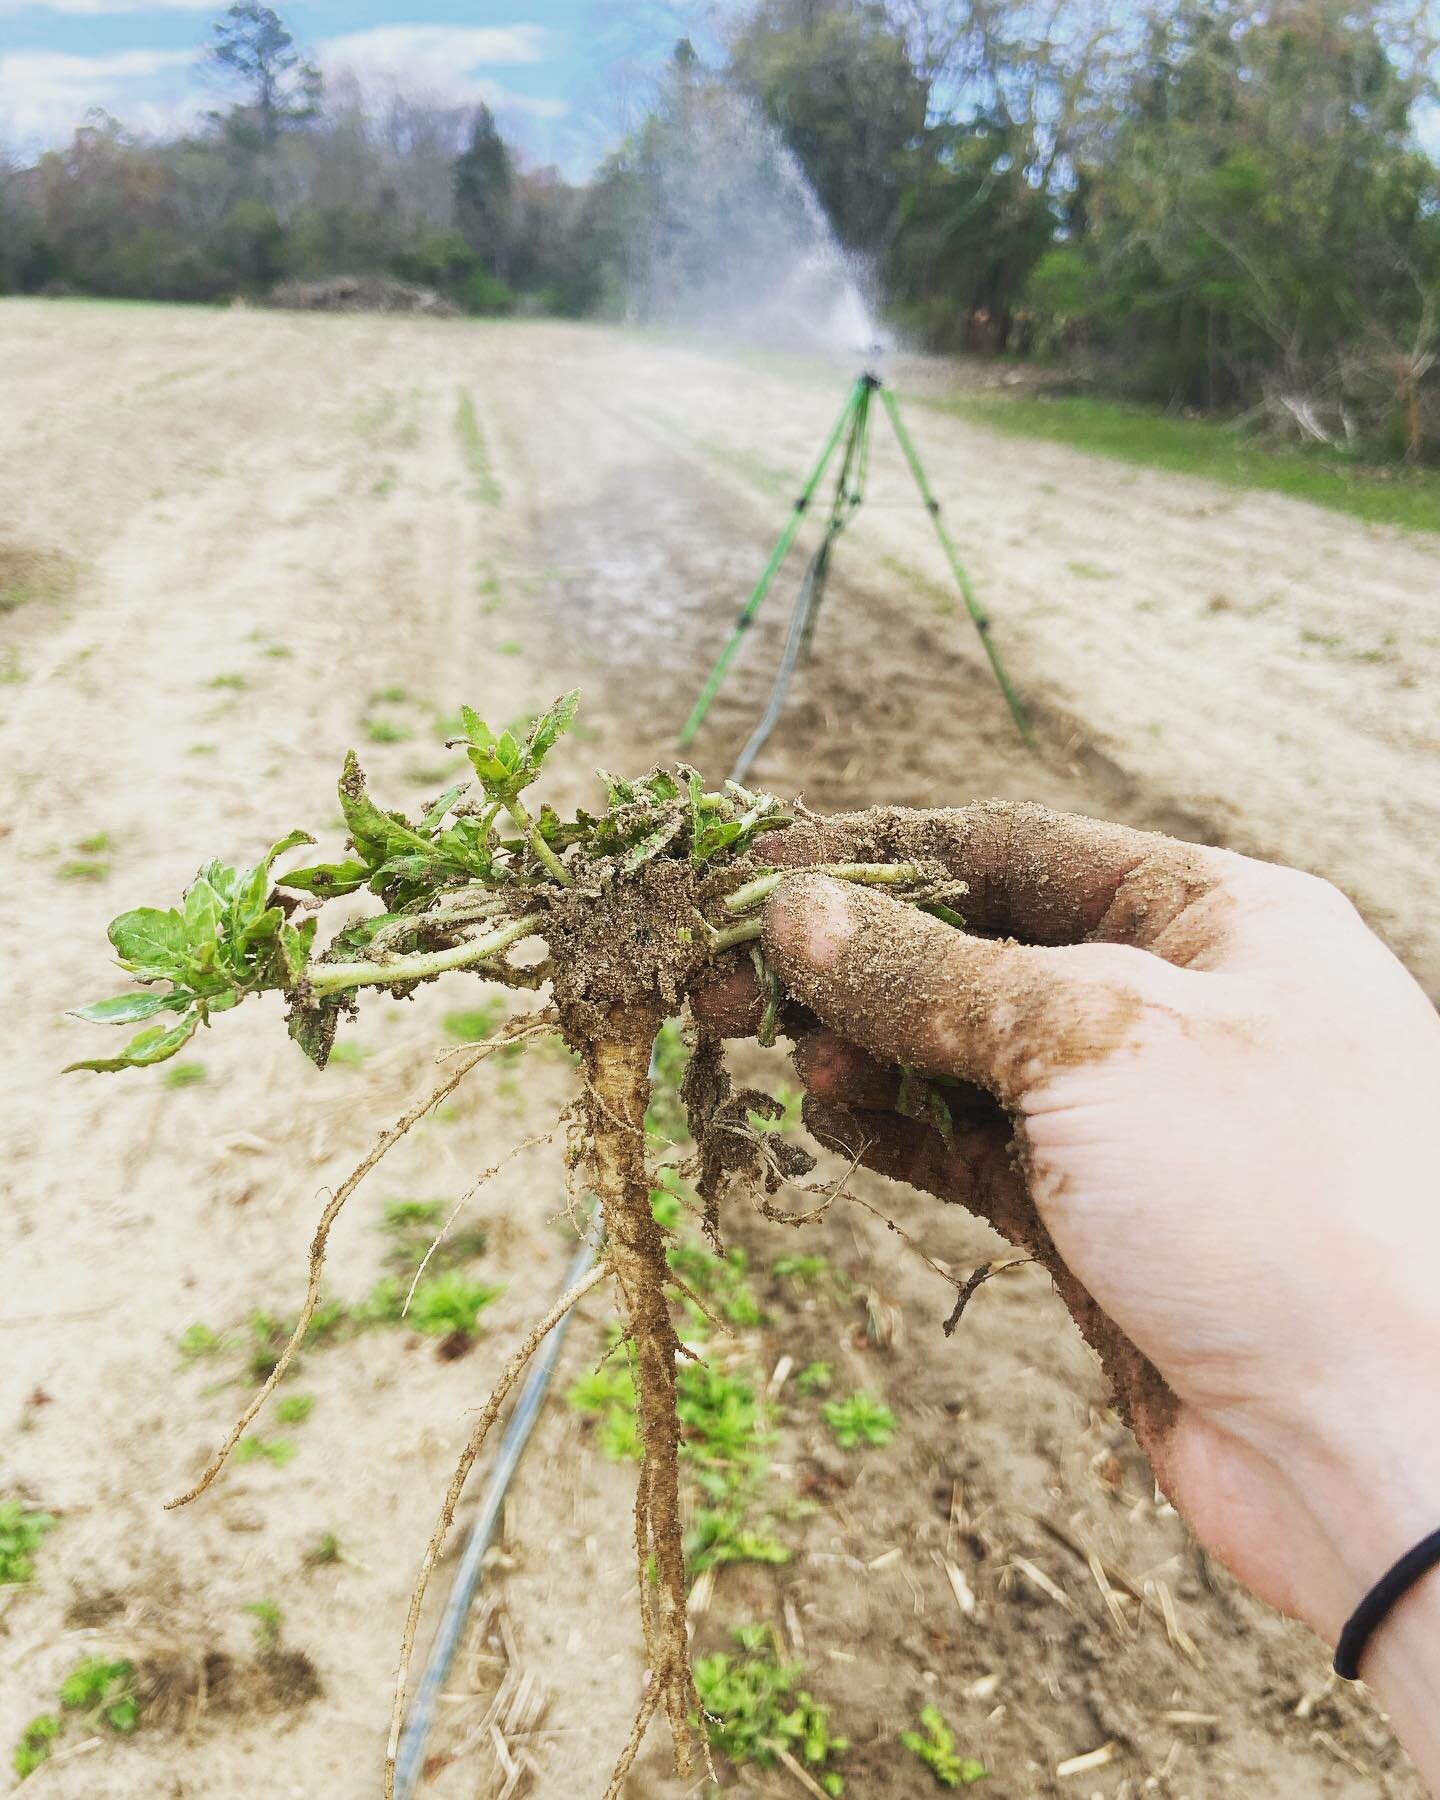 The best thing about our current irrigation method is it gives me PLENTY of time to weed 🌱

#justfarmin #tidewaterfarm #familyfarm #upickflowers #wildflowers #bloom #getoutside #southjersey